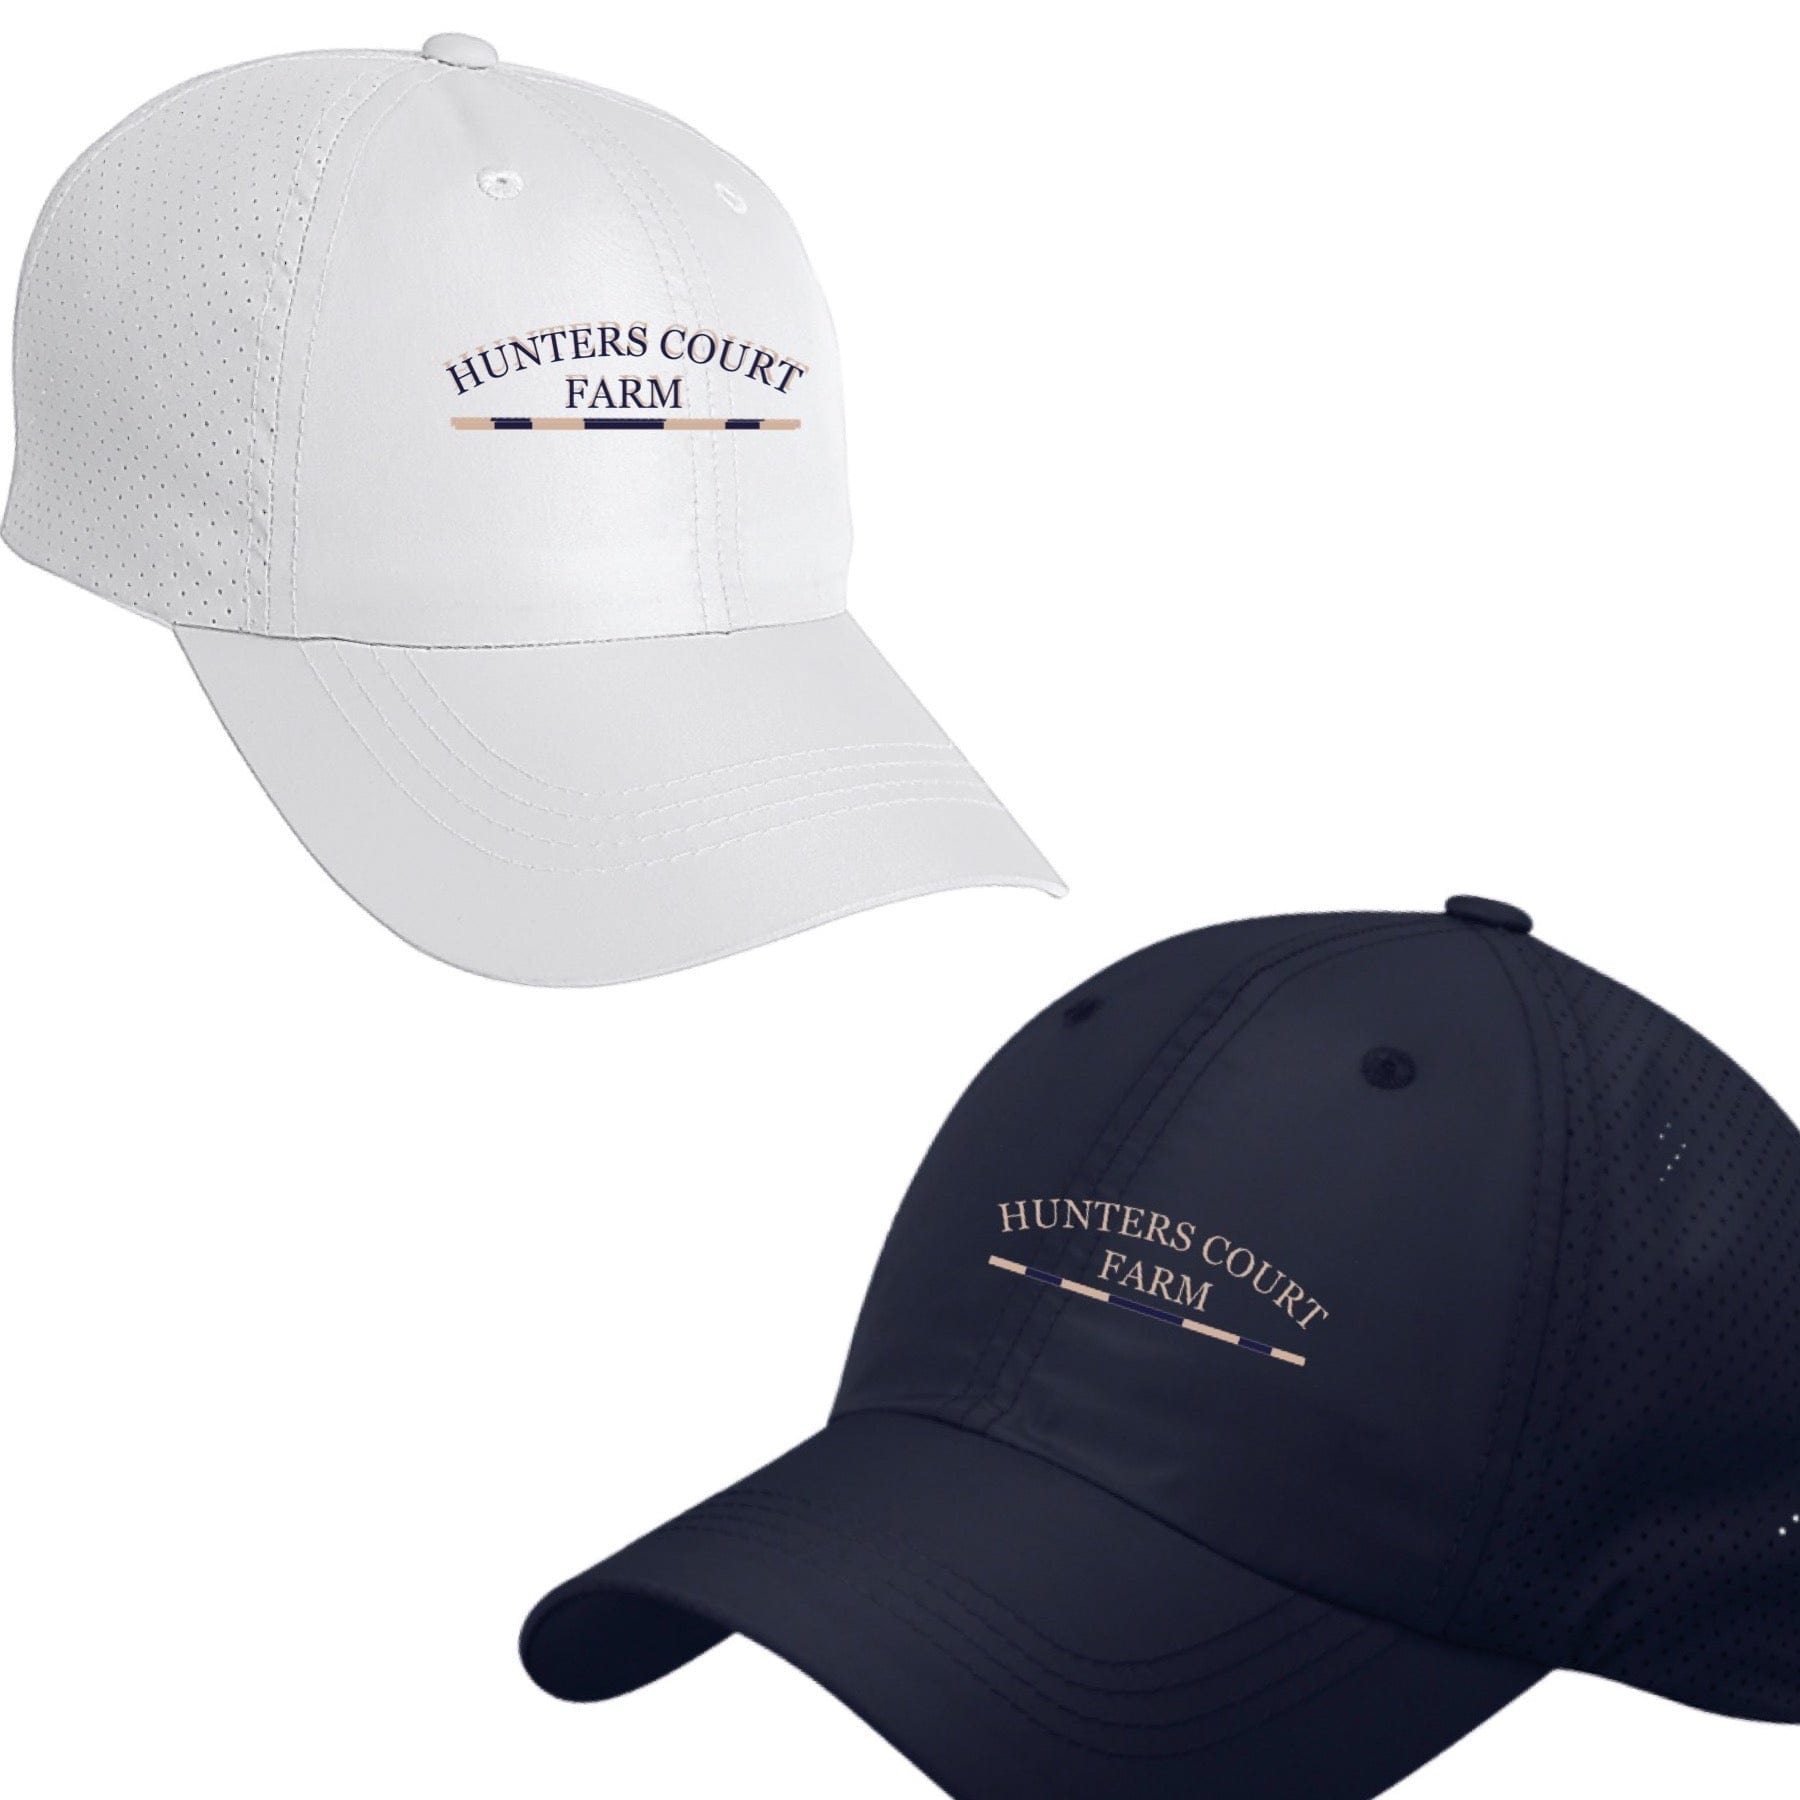 Equestrian Team Apparel Hunters Court Farm Baseball Cap equestrian team apparel online tack store mobile tack store custom farm apparel custom show stable clothing equestrian lifestyle horse show clothing riding clothes horses equestrian tack store